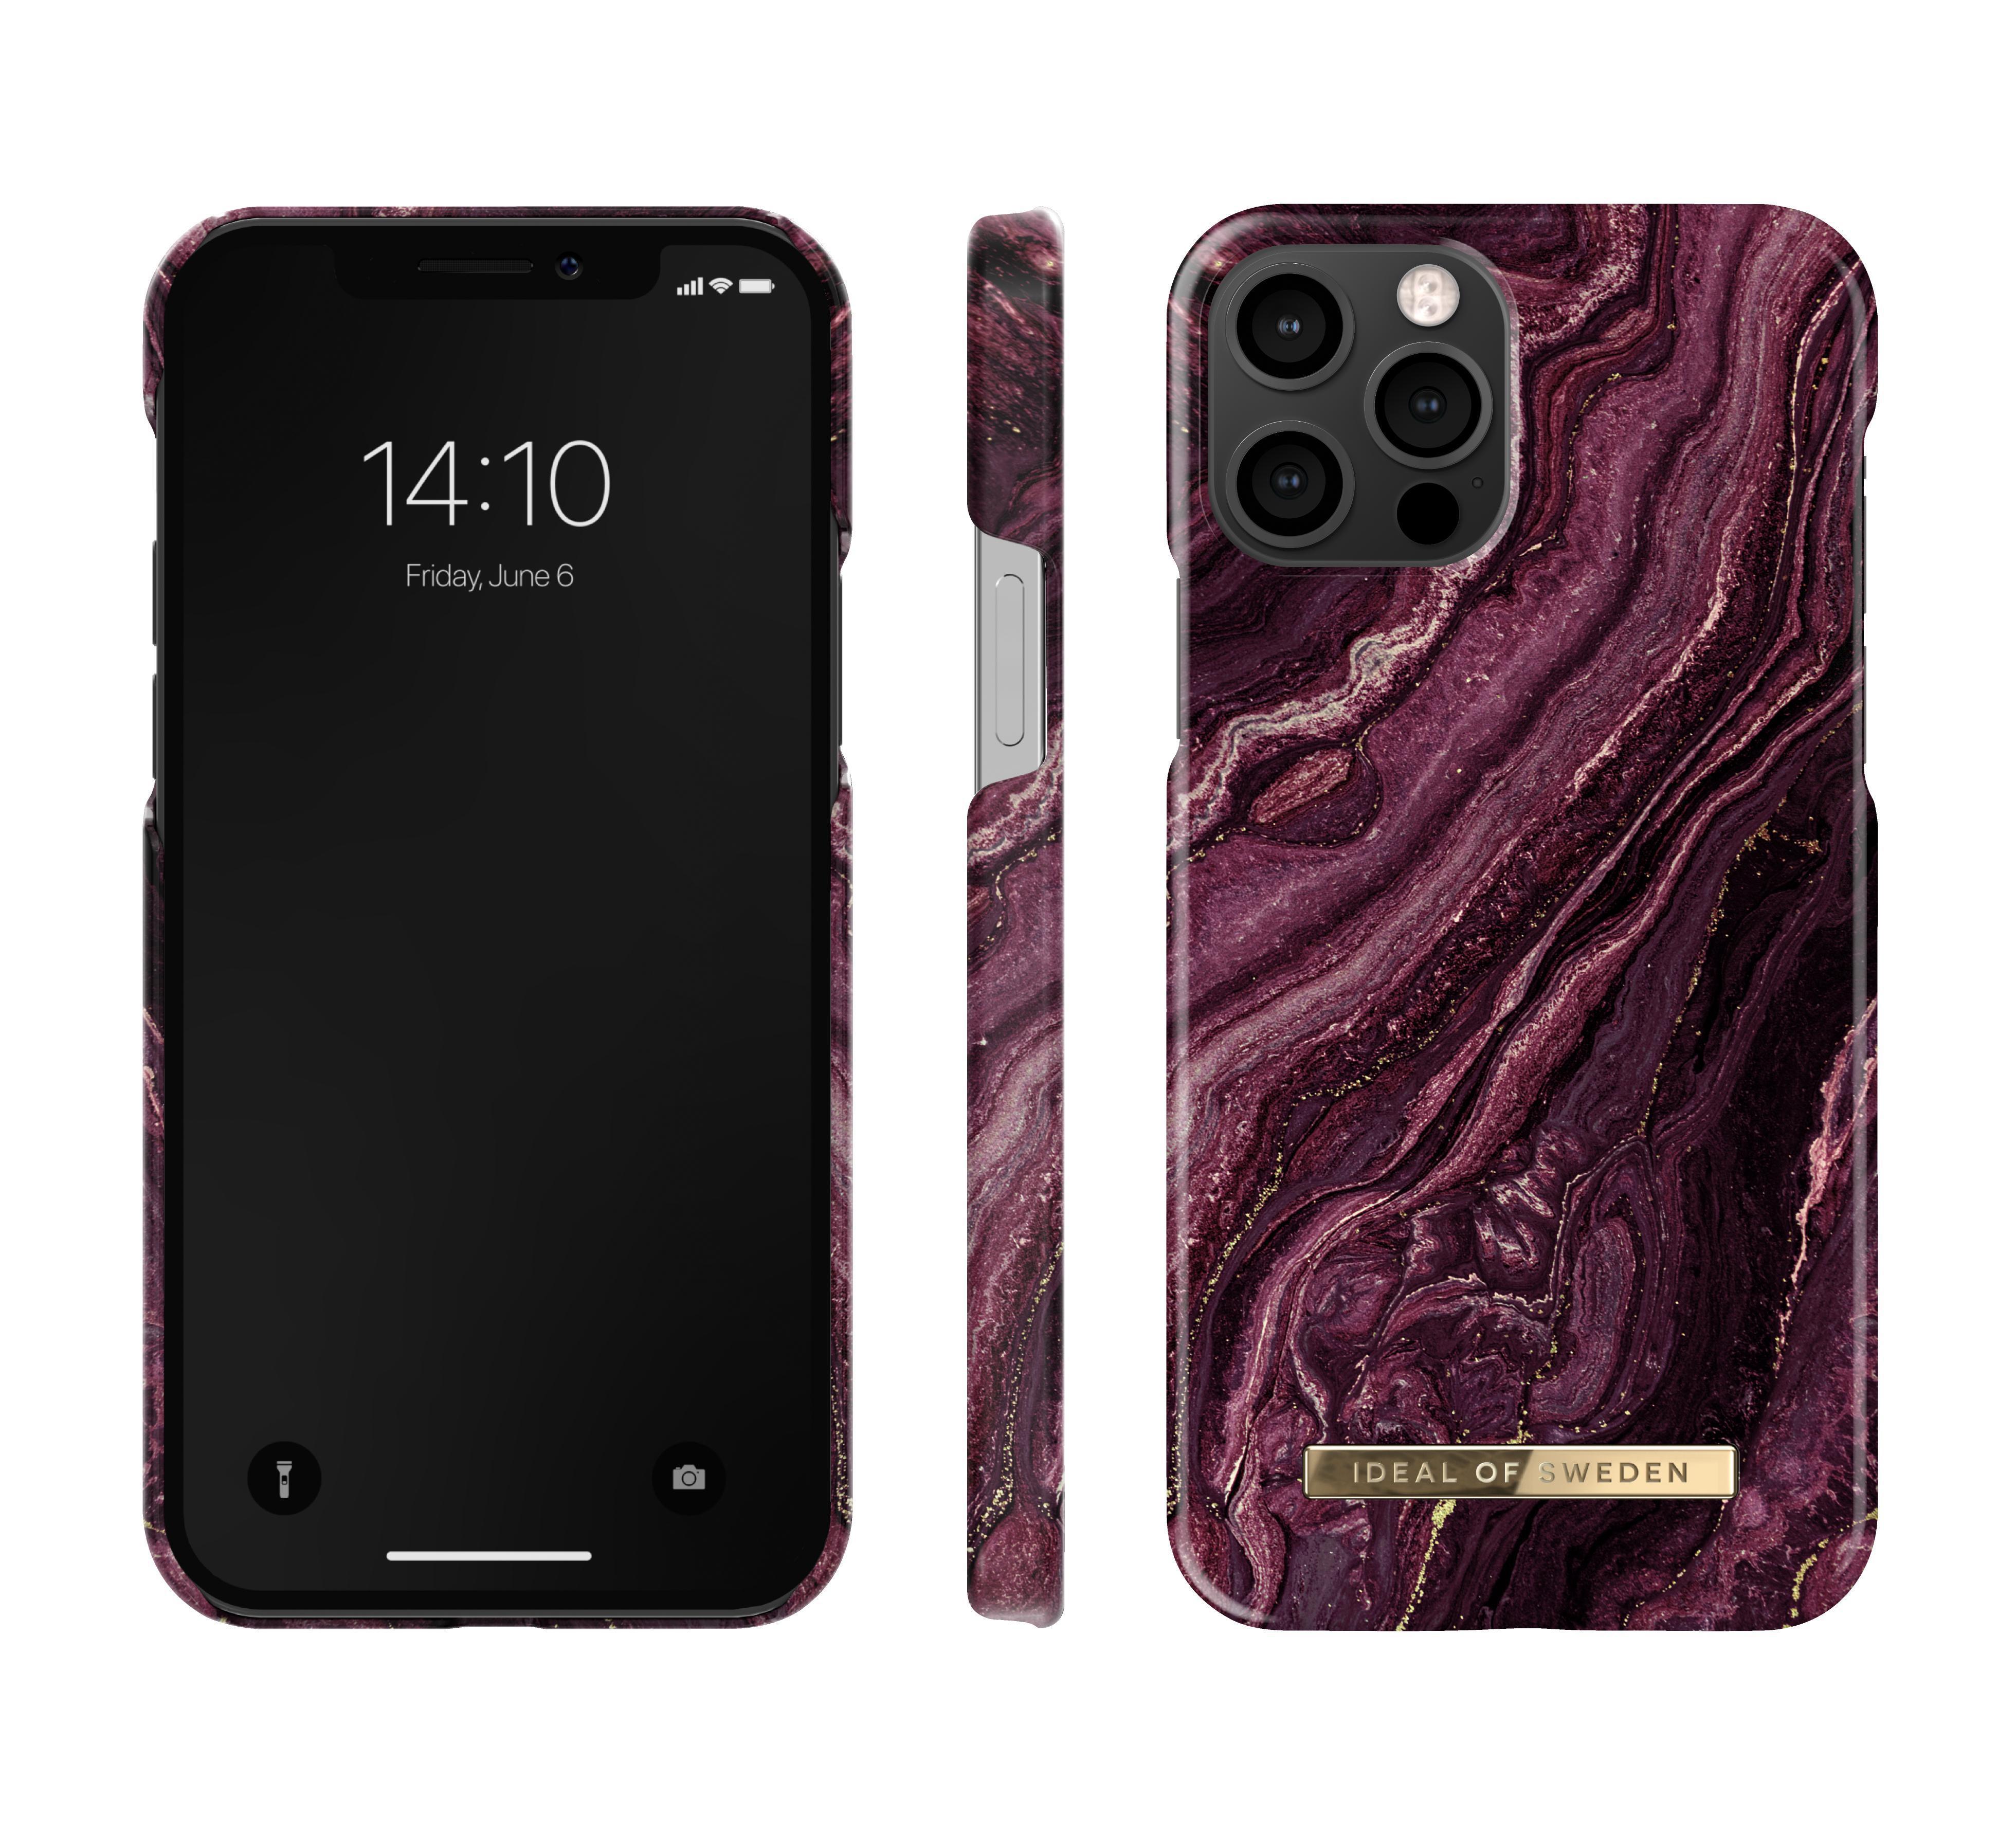 IDEAL OF 12 SWEDEN 12, iPhone Backcover, iPhone Purple Pro, Fashion, Apple